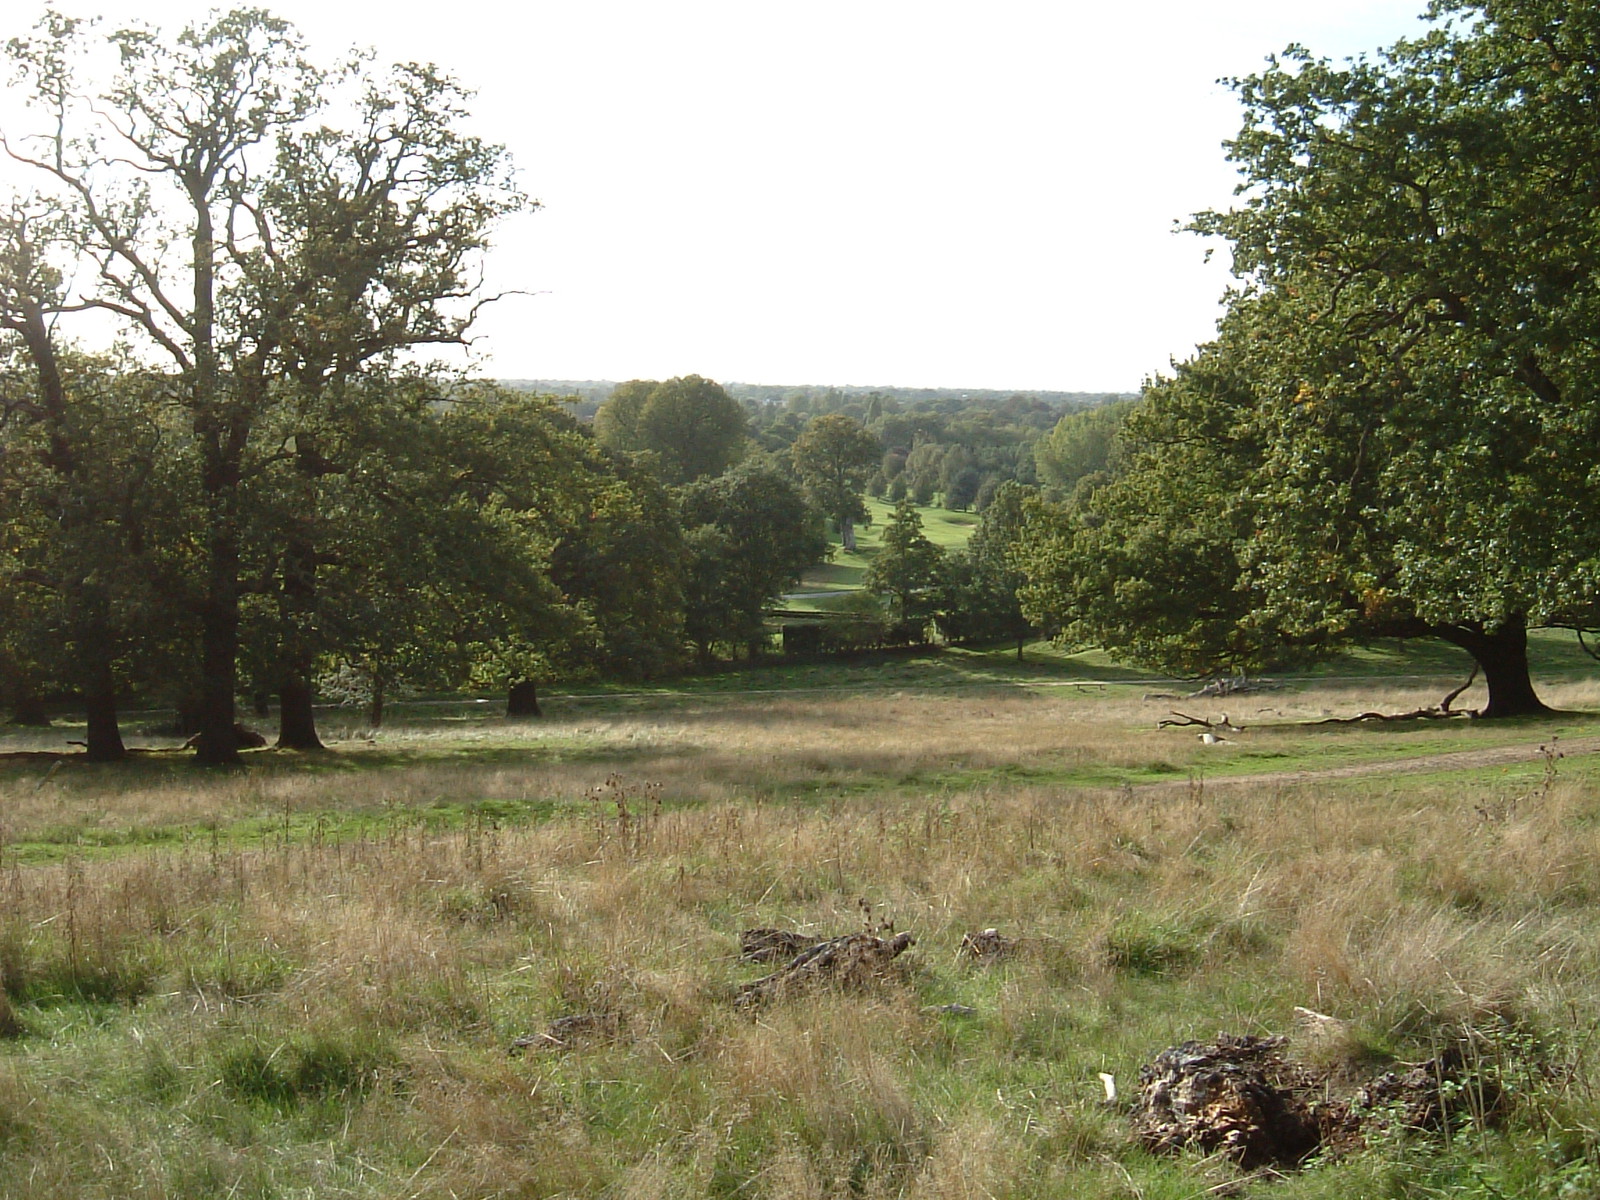 The view west over Petersham Park